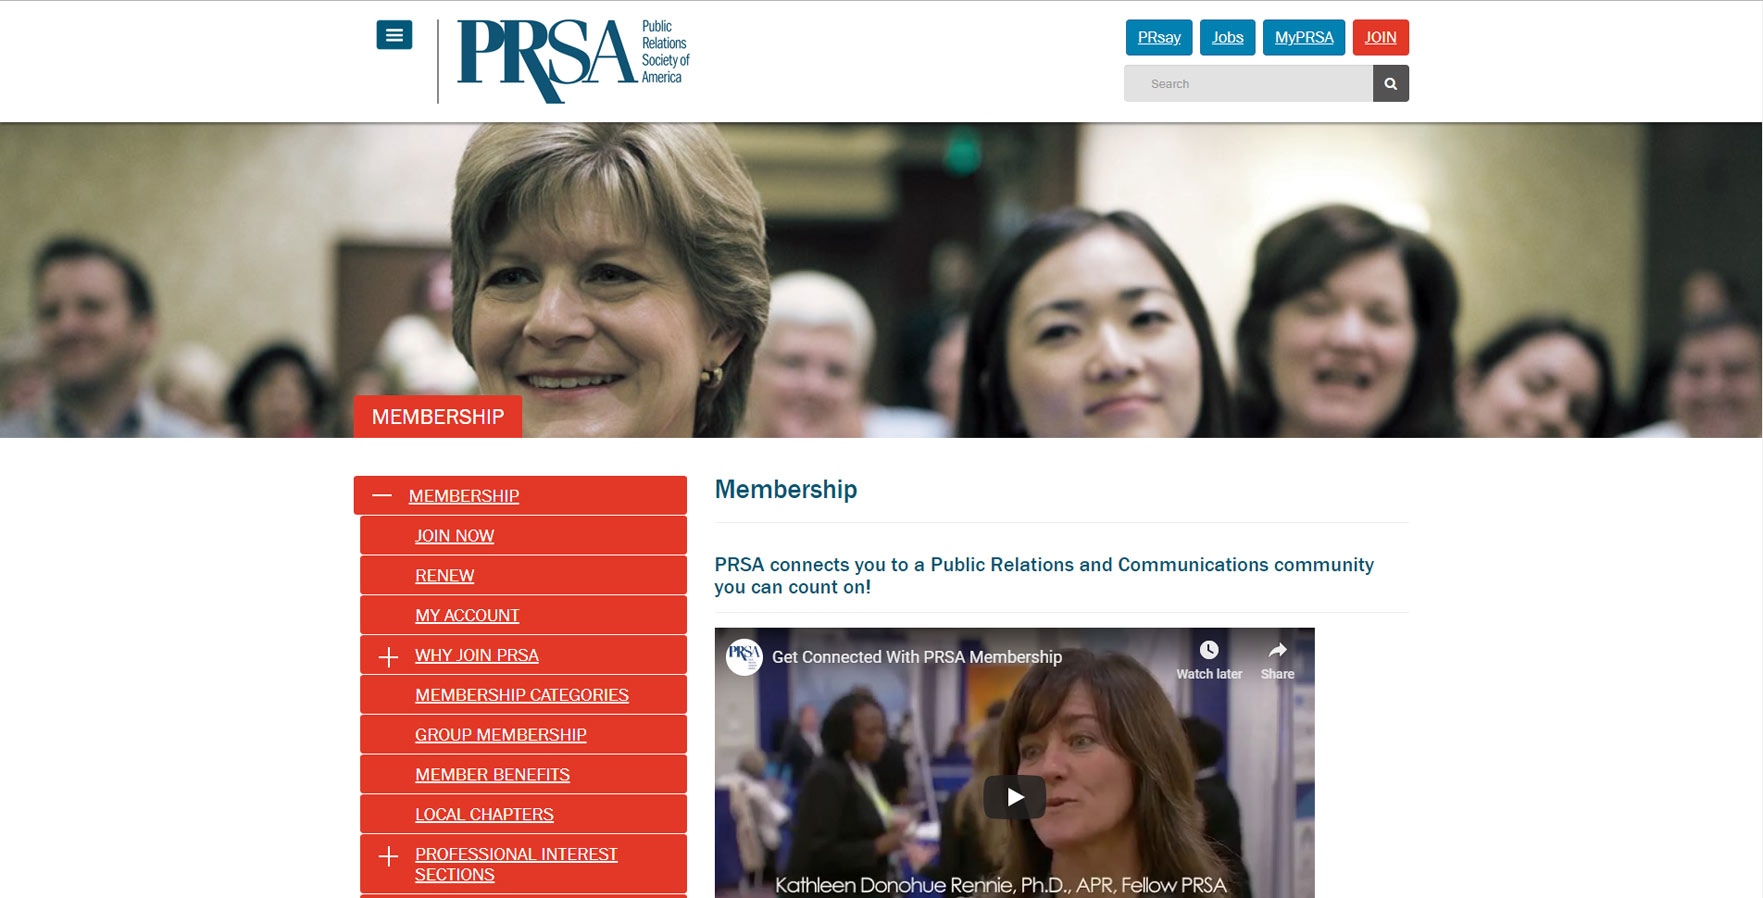 A WordPress website developed by Advanced Systemics for the Public Relations Society of America